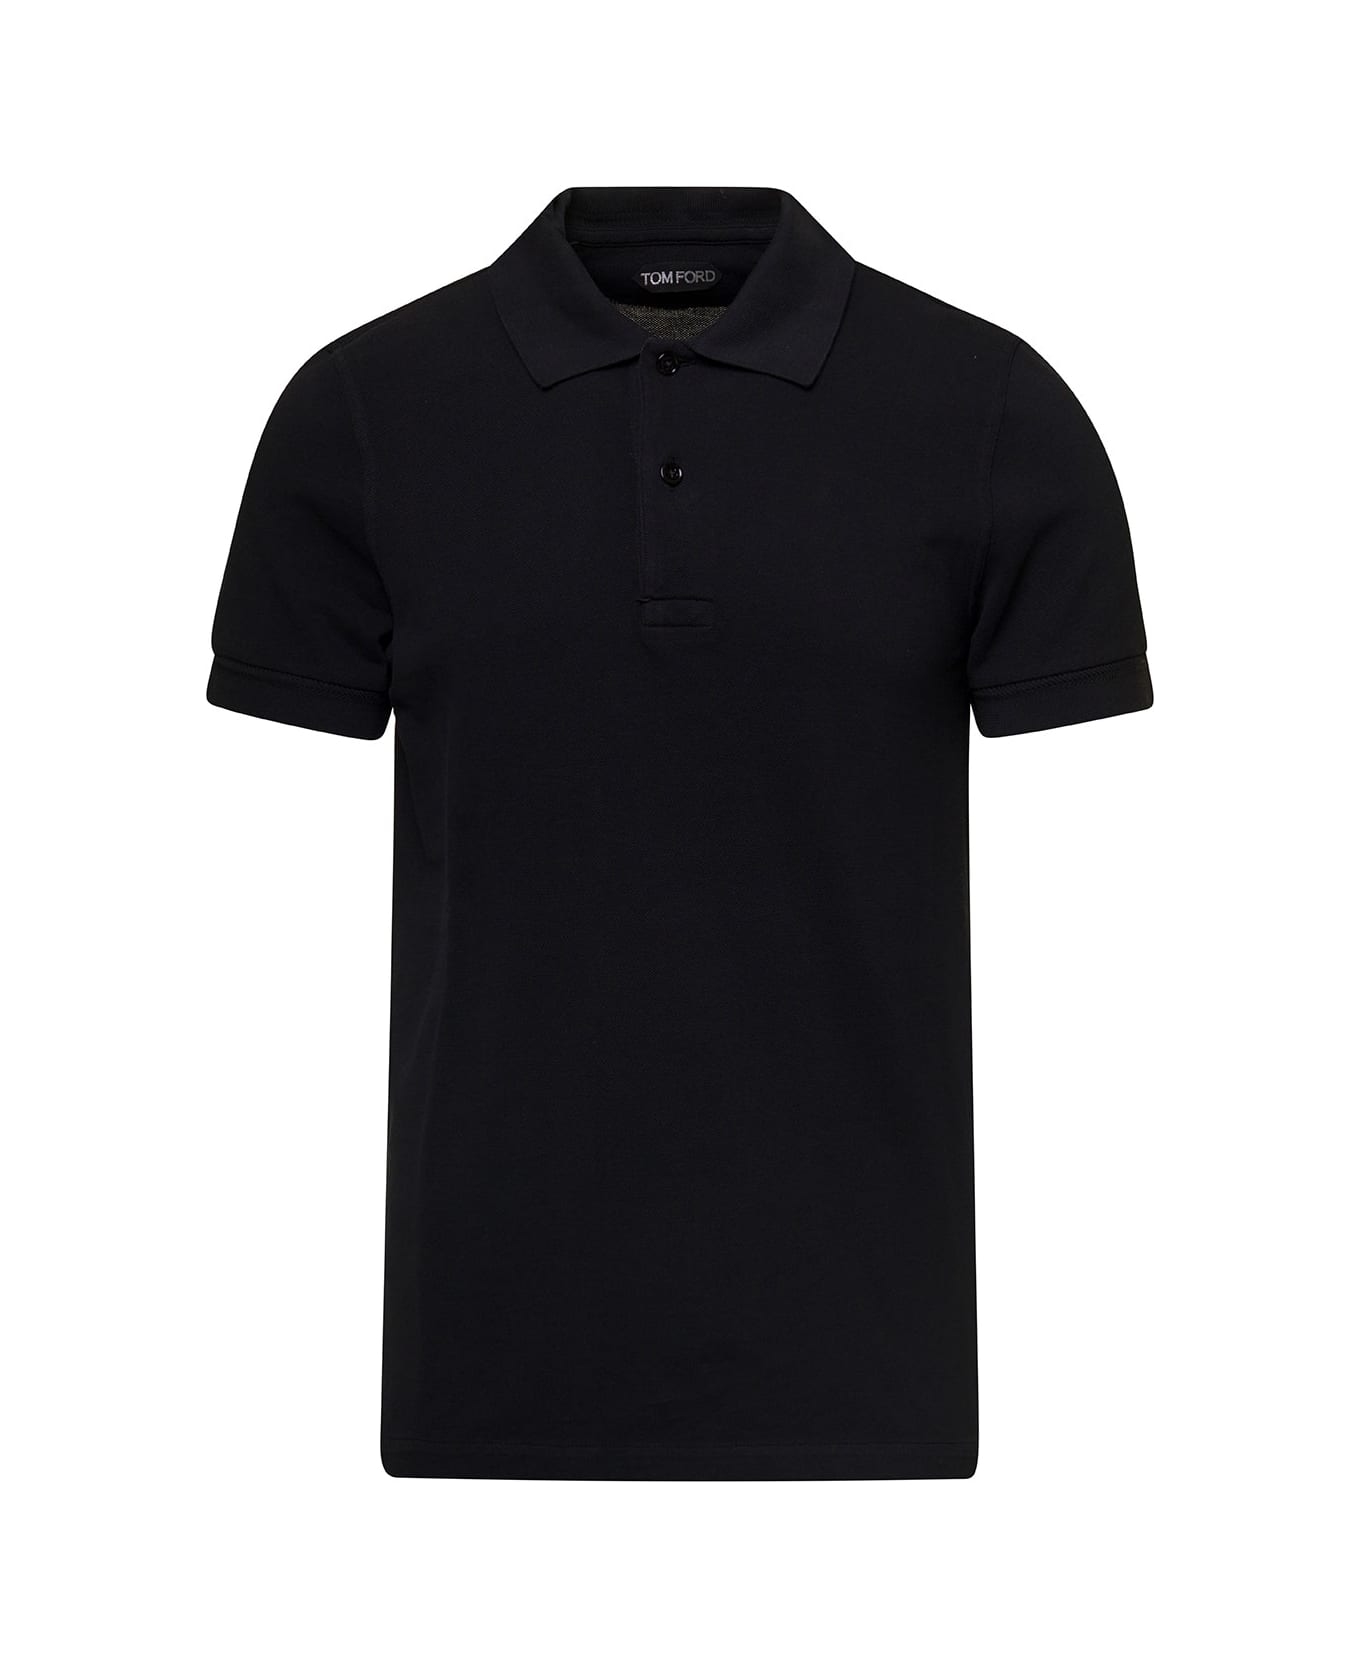 Tom Ford Black Short-sleeves Polo In Cotton Piquet Jersey Man - BLACK